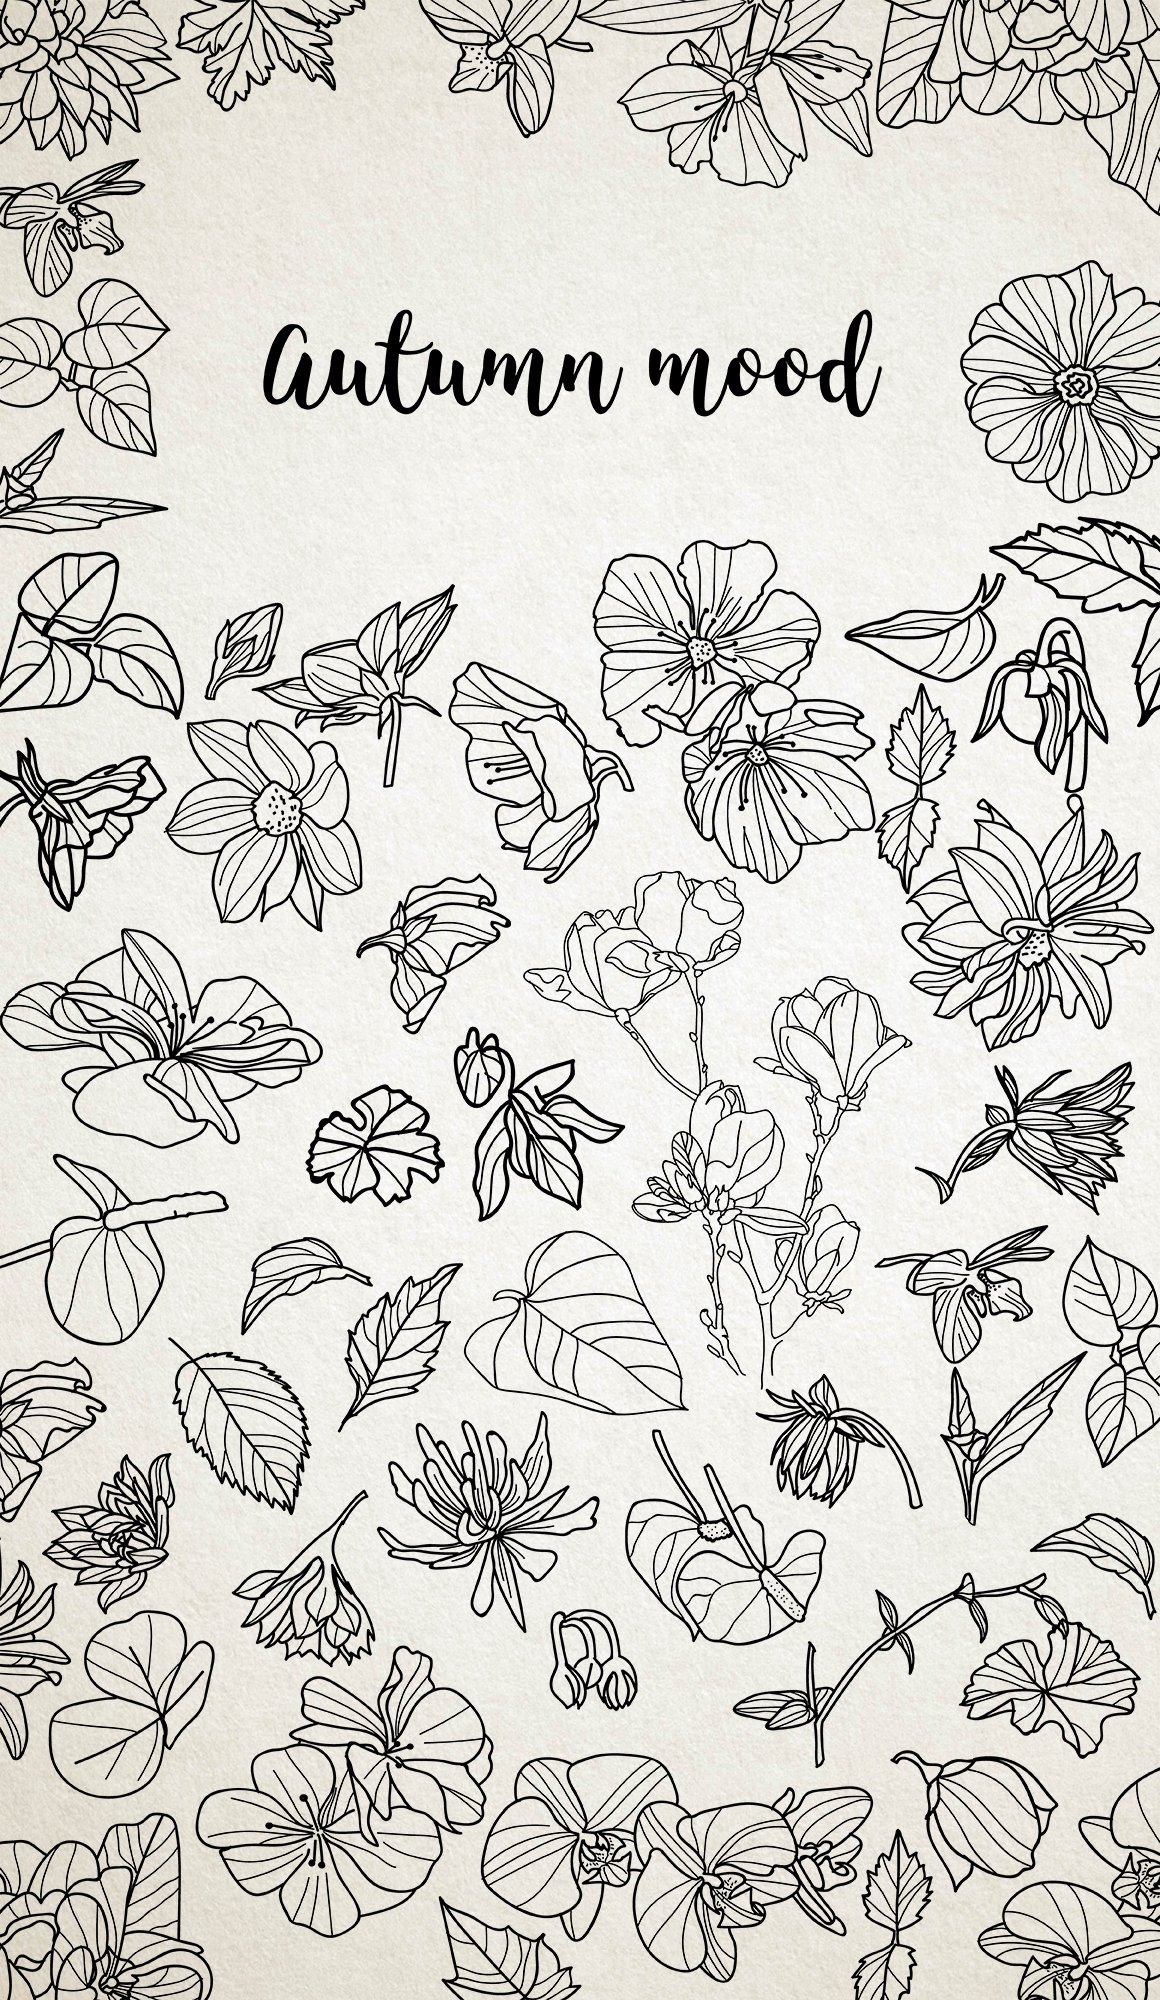 50 Hand-drawn Floral Elements and Patterns